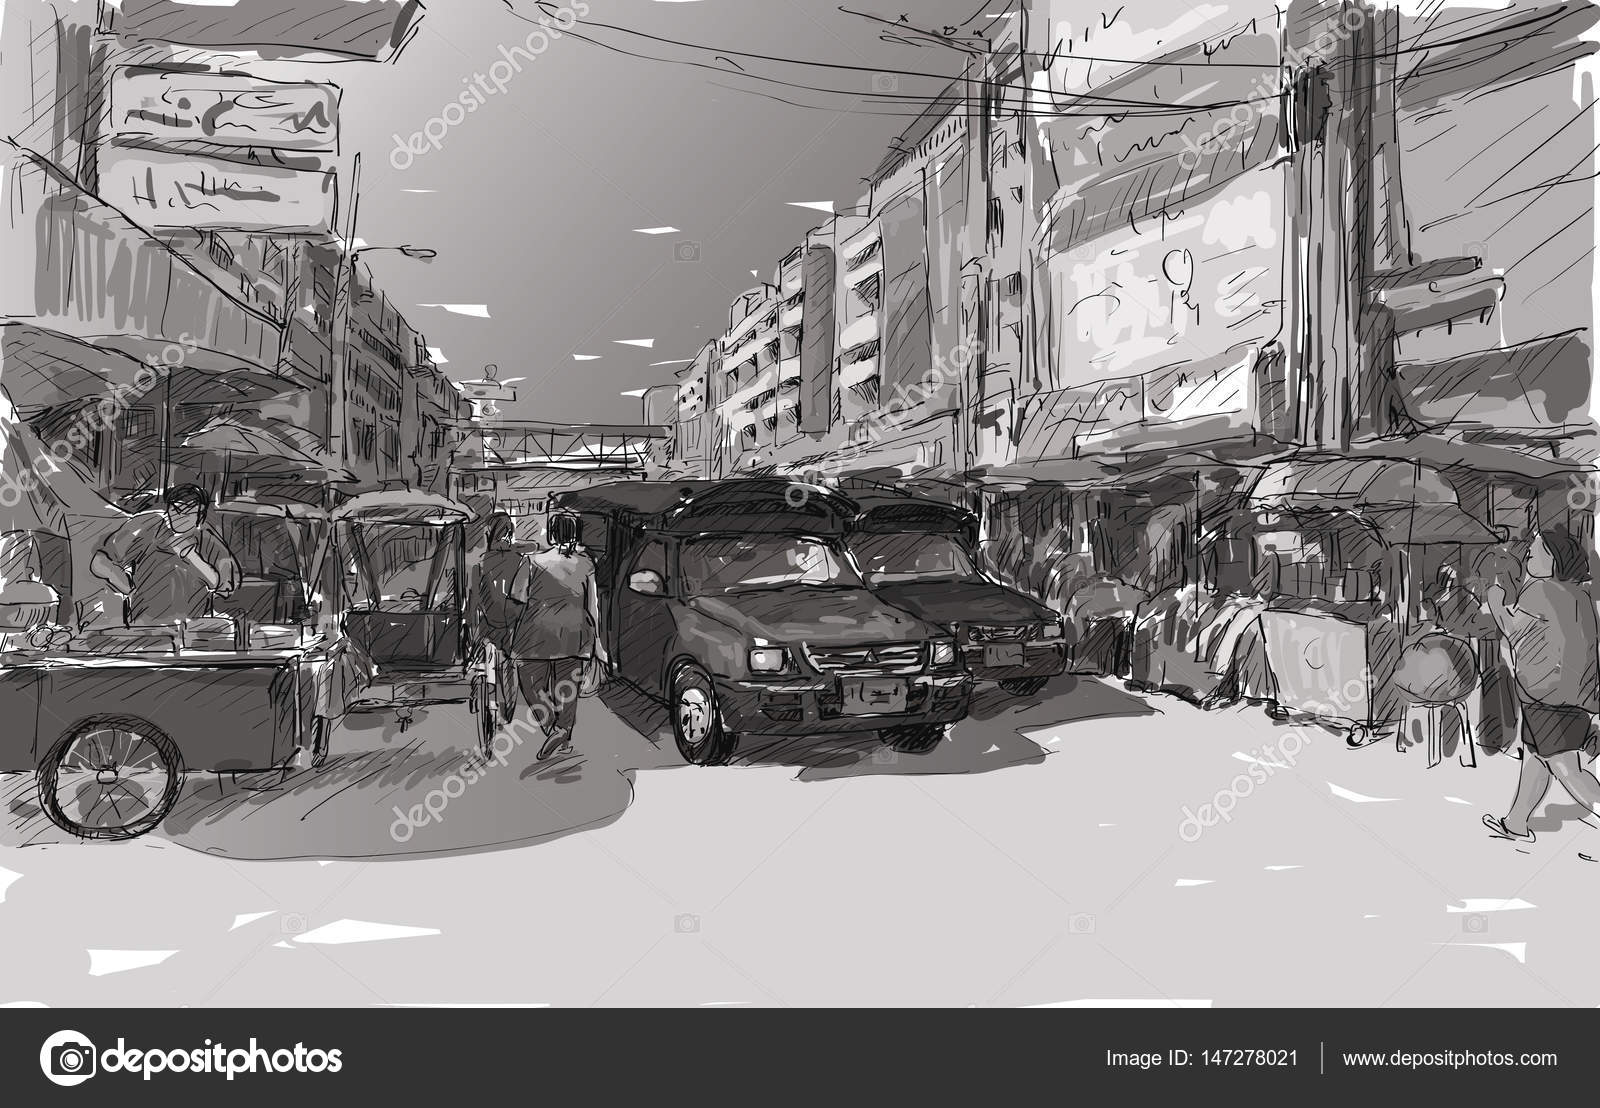 Premium Photo | A drawing of cars in a busy street with a building in the  background.